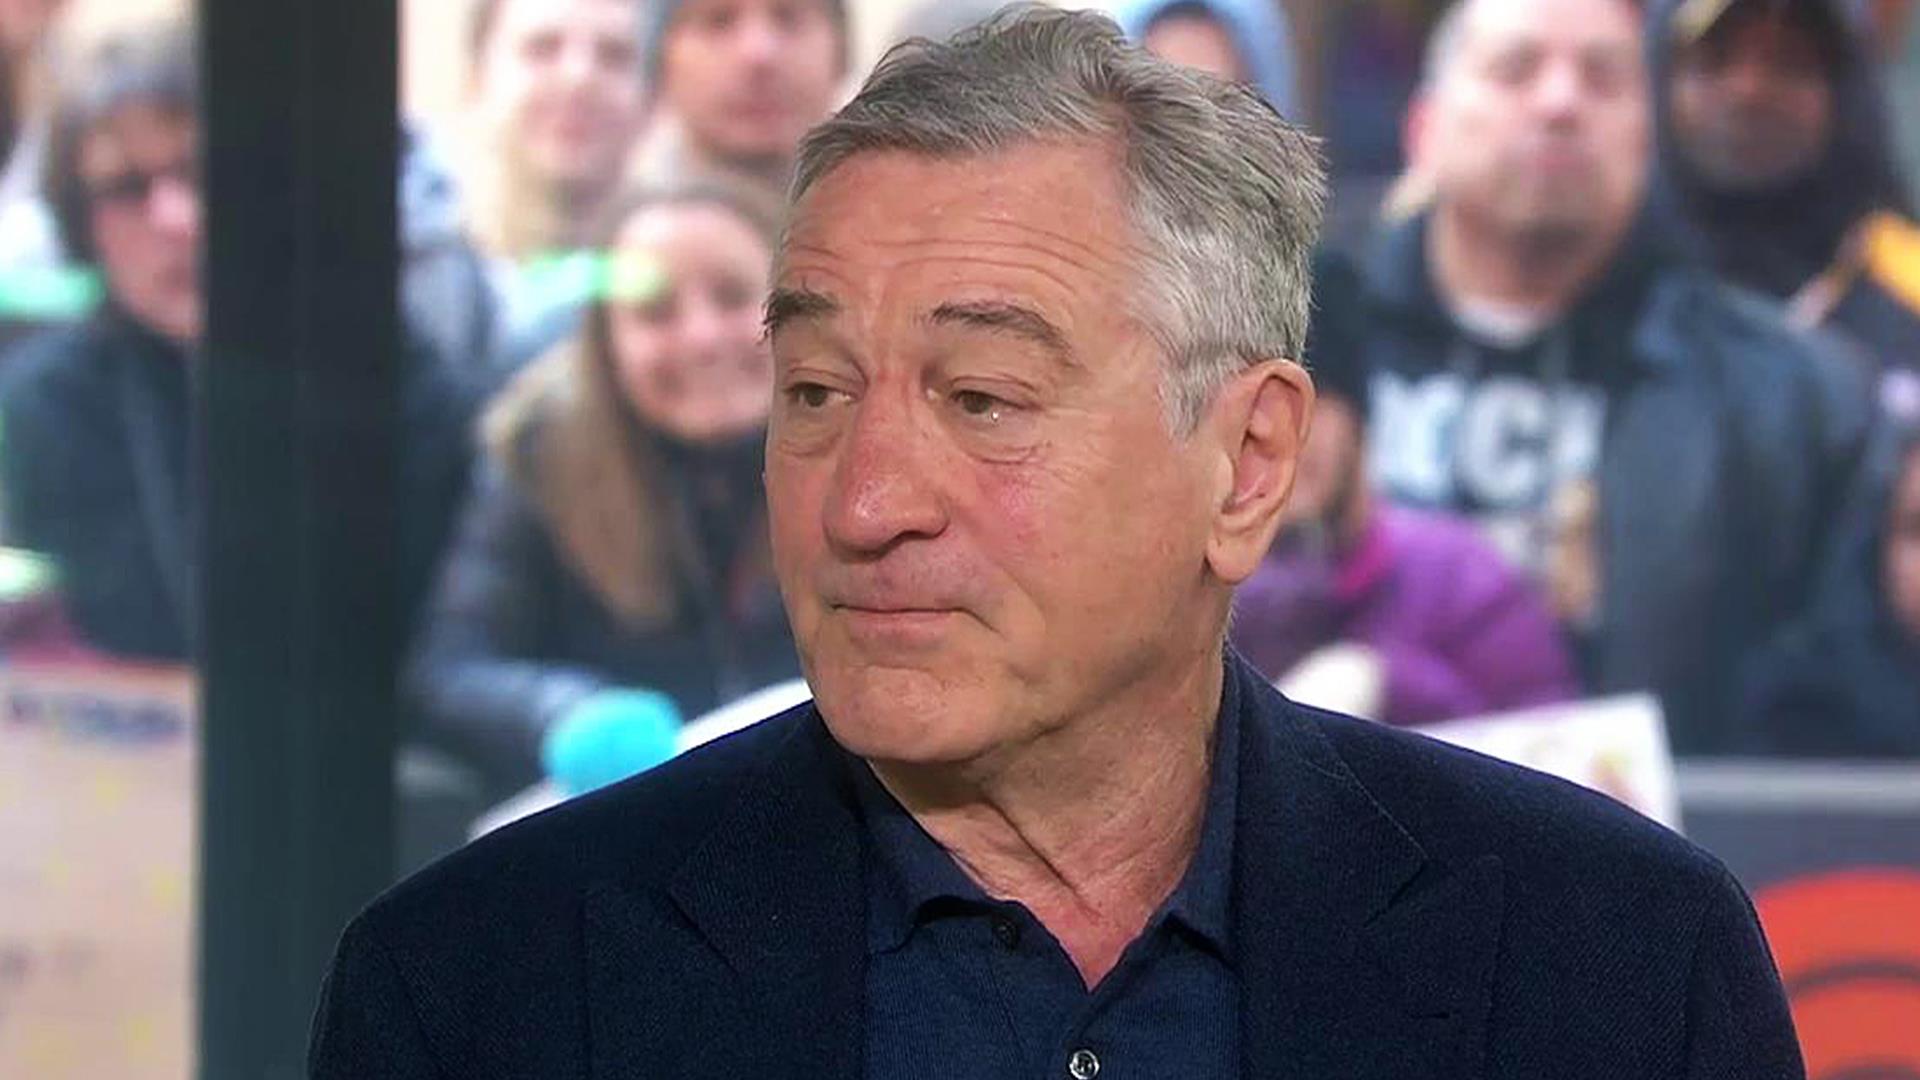 Robert De Niro has Made an Emotional Confession about His 9-Month-Old Daughter